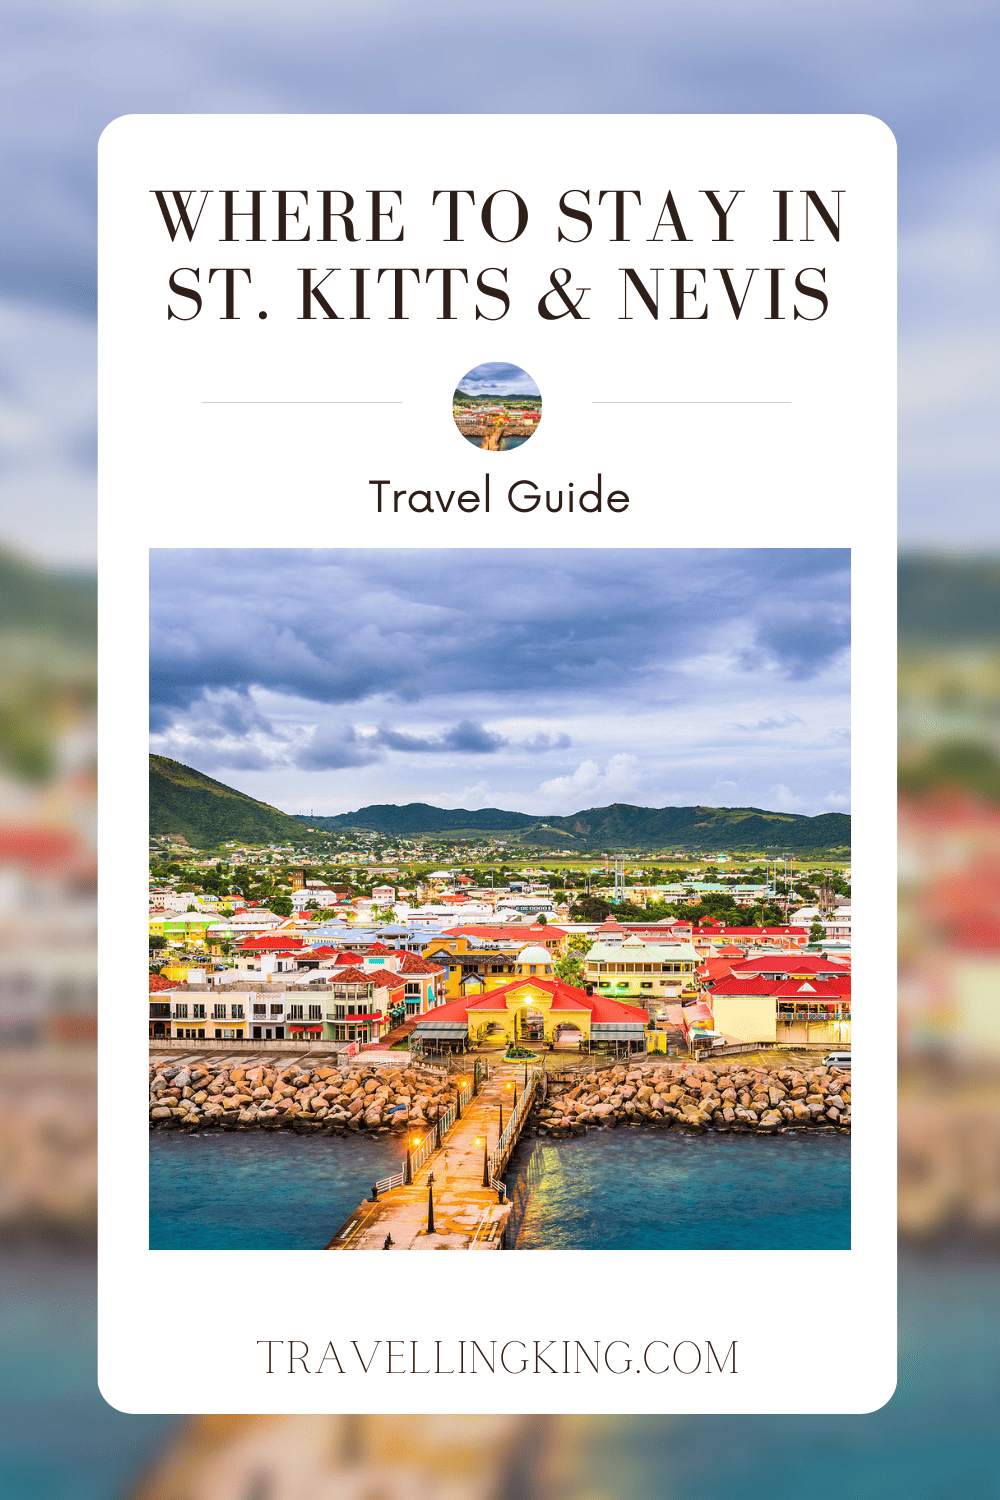 Where to stay in St. Kitts & Nevis